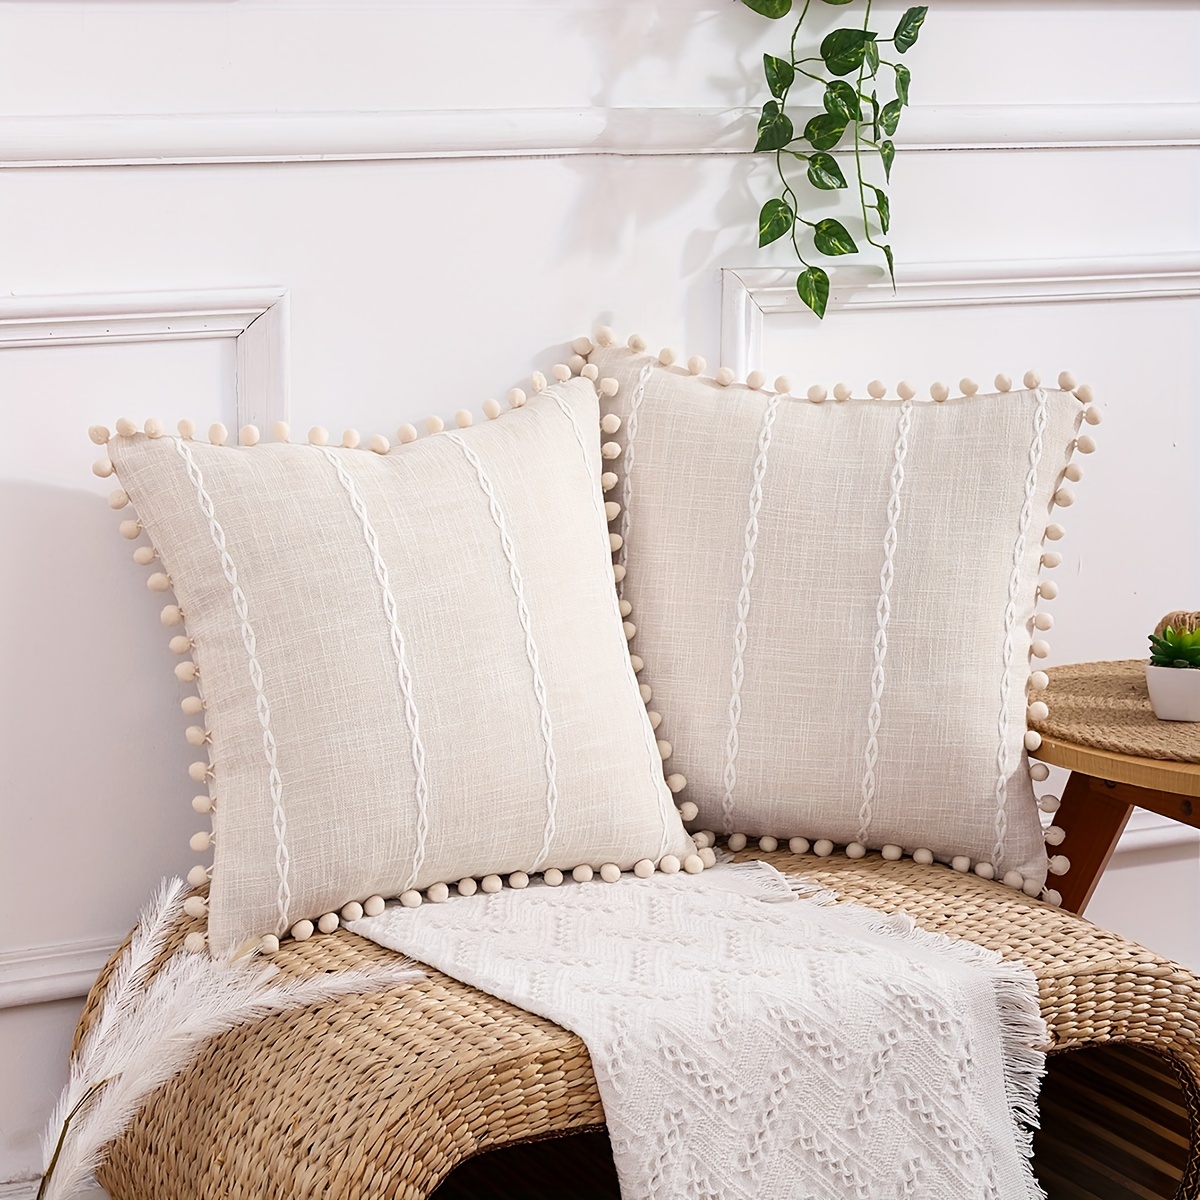 

2pcs/set, Double Side Embroidery Pillow Cover Pom Pom Cushion Cover Living Room Home Decoration No Insert